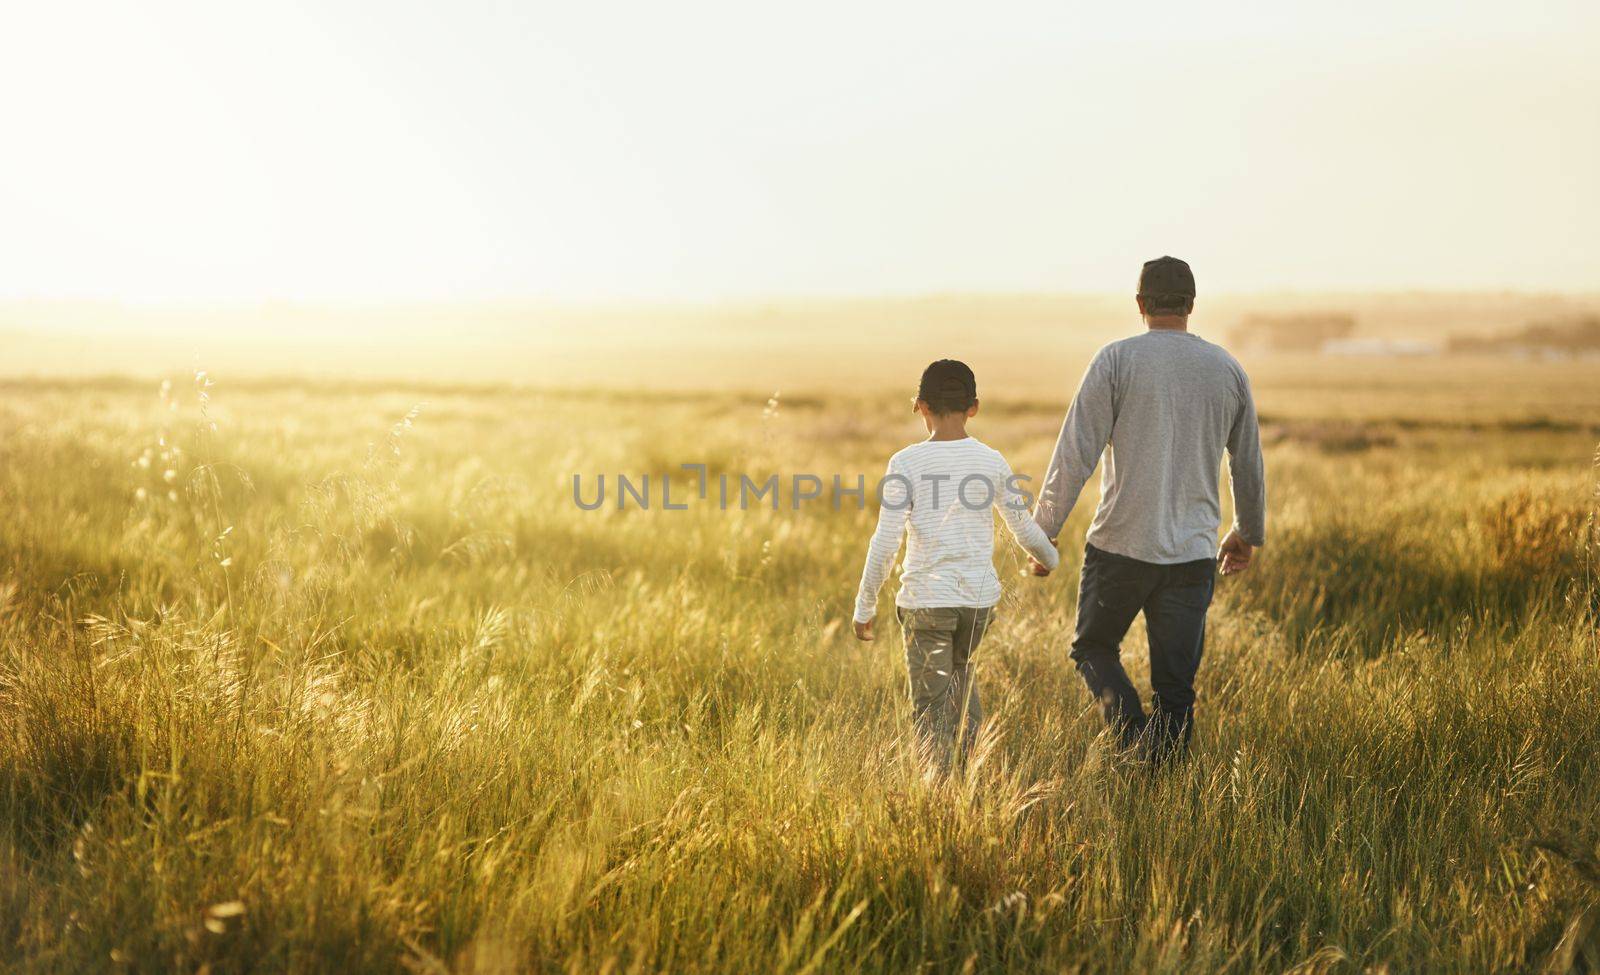 Theres beauty in simplicity. a man taking his son for a walk out on an open field